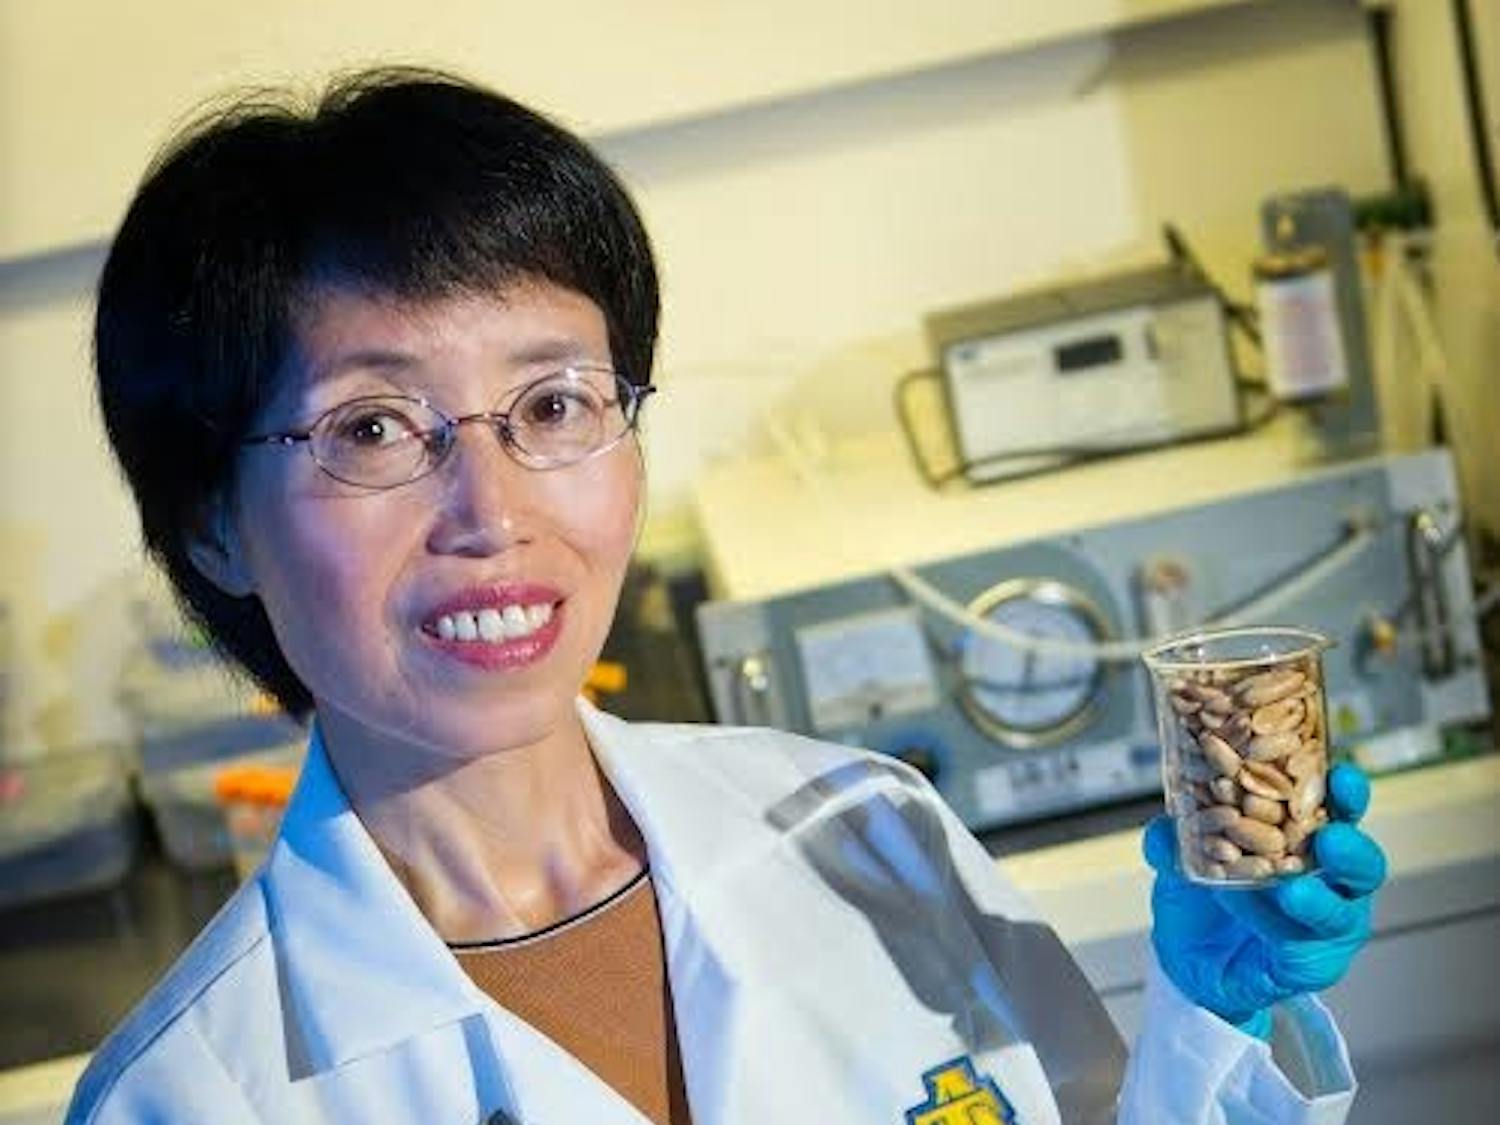 Dr. Jianmei Yu, a food science researcher in the College of Agriculture and Environmental Sciences at N.C. A&T,  who has patented research into decreasing allergens in peanuts. The process retains the quality and functionality of whole, roasted peanuts, and can easily be integrated into existing food production processes.